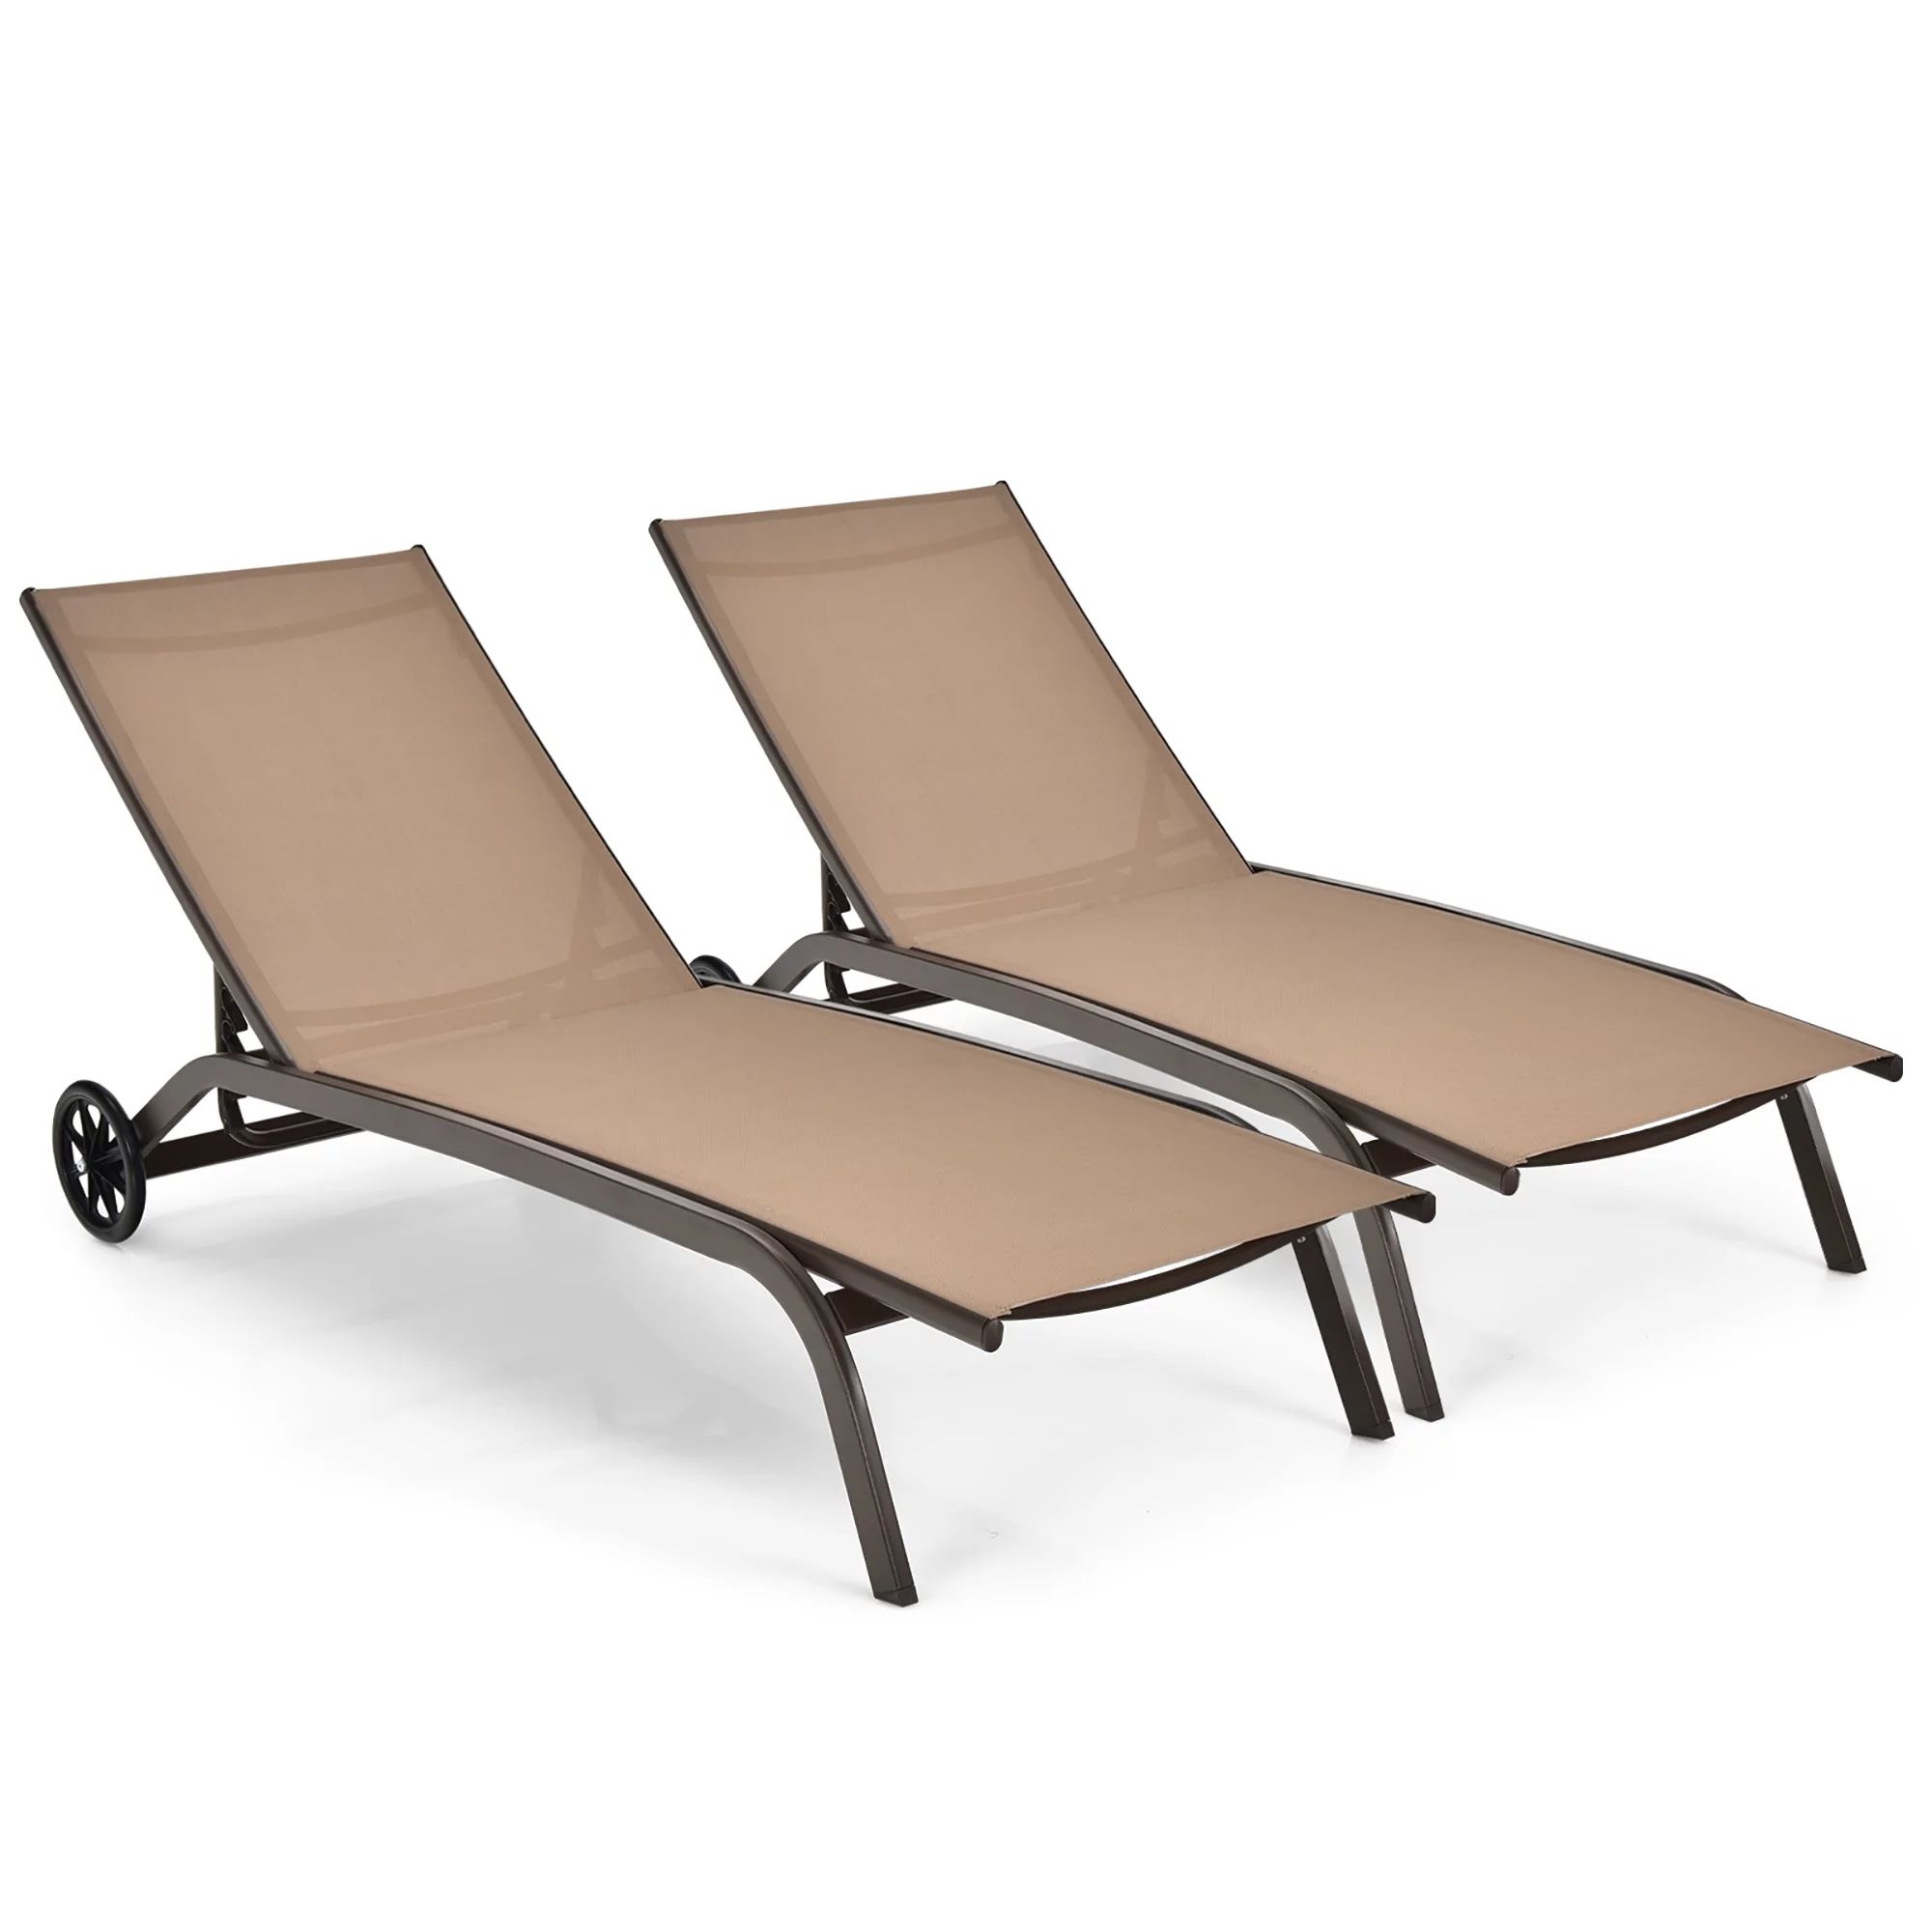 Costway 2PCS Patio Lounge Chair Chaise Adjustable Back Recliner W/Wheels Brown | Walmart (US)